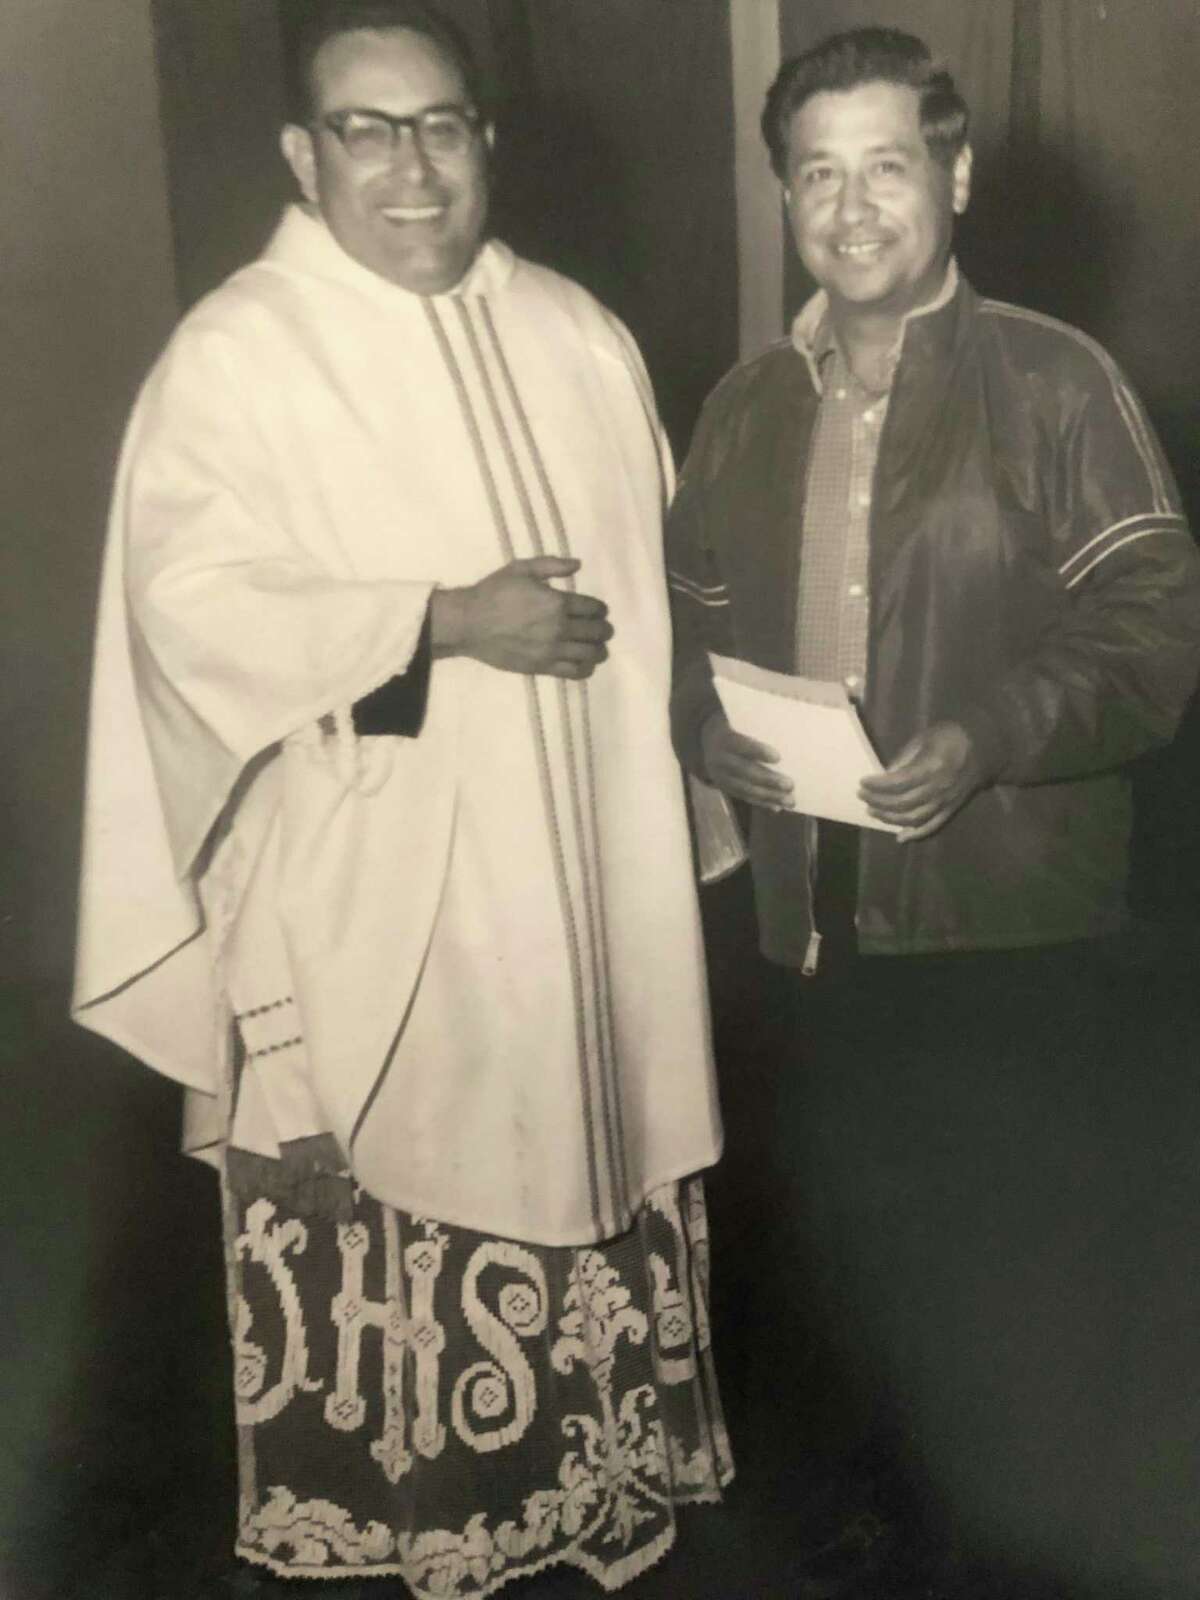 Father Rafael "Ralph" Ruiz with United Farm Worker founder Cesar Chavez sometime in the 1960s in Texas.